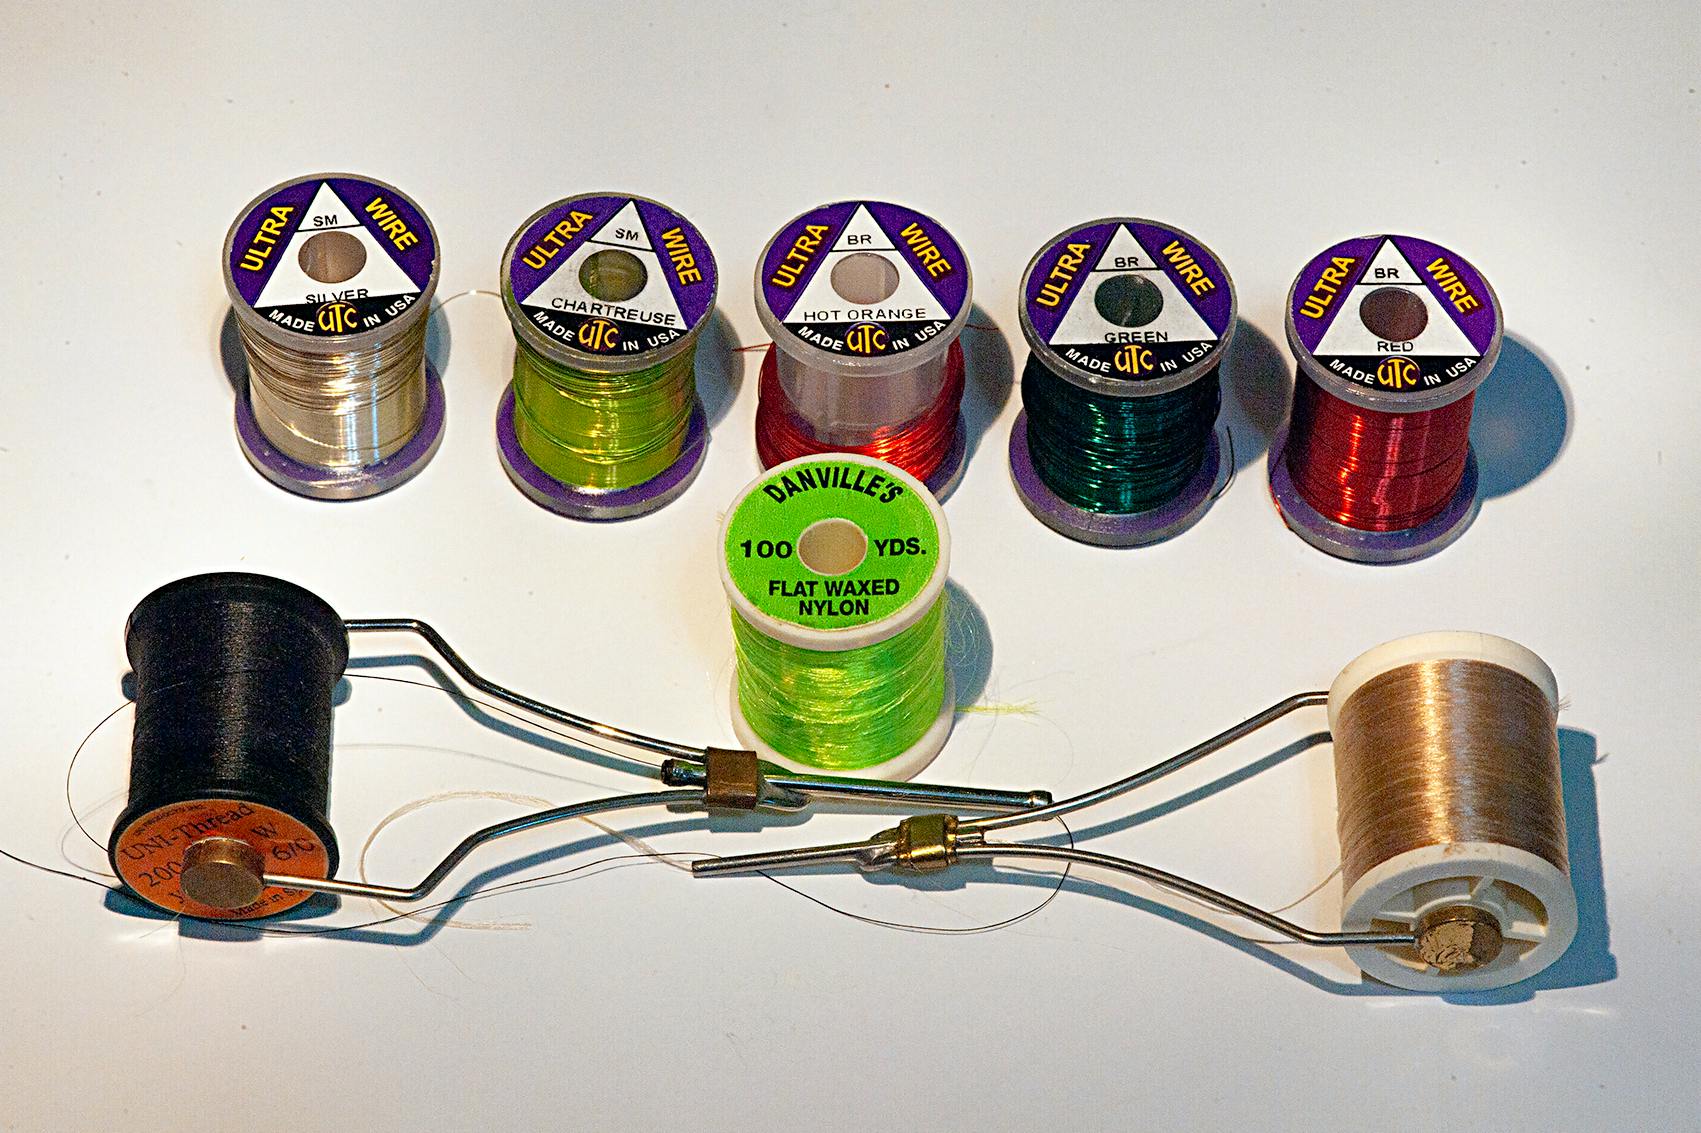 Six different types of thread for tying flies are pictured along with two wire bobbins holding two other kids of thread. The threads are a range of colors including green, red, tan, and black.